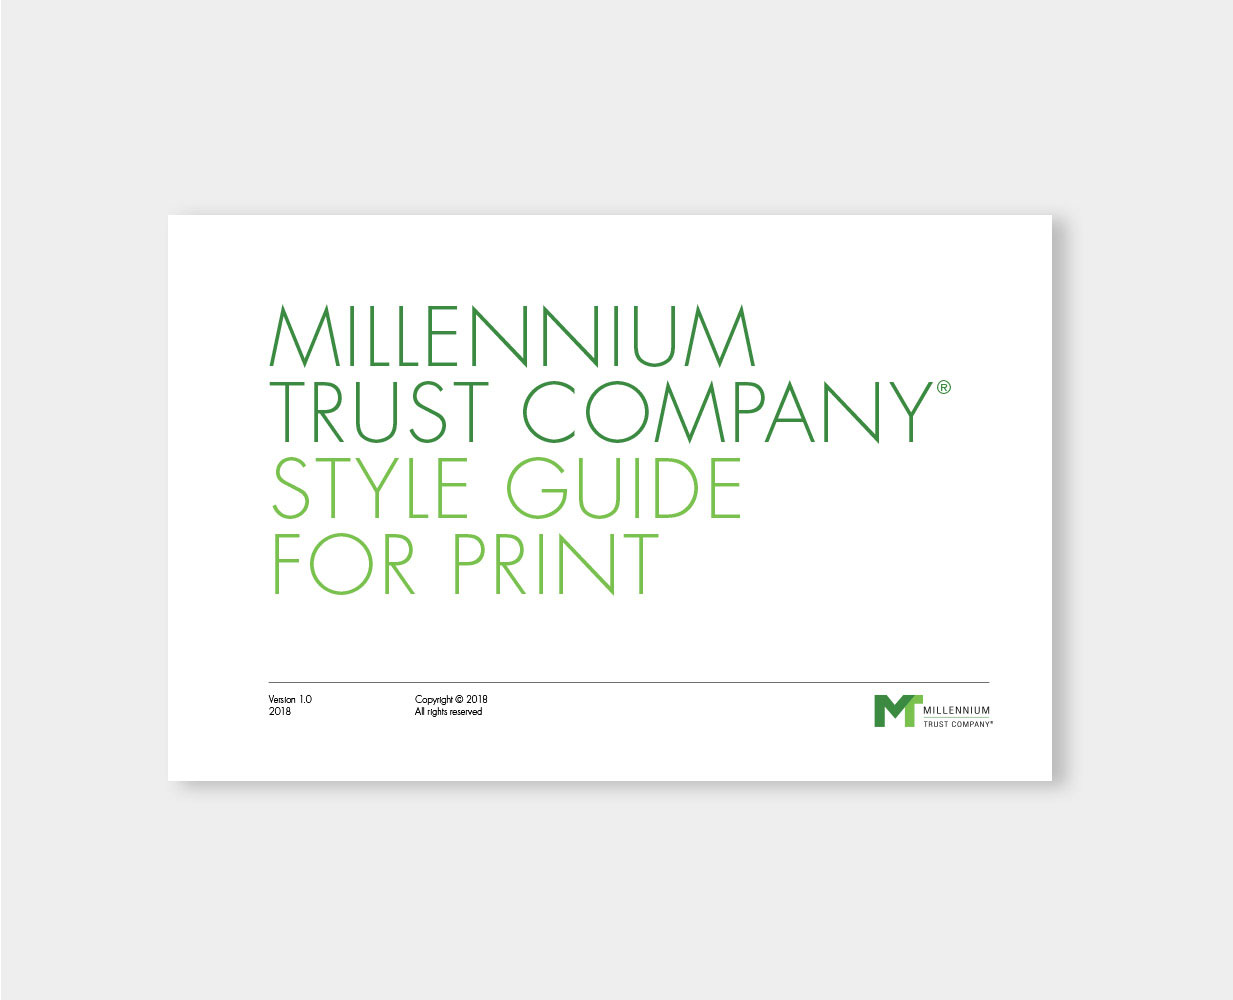 Millennium Trust Style Guide For Print